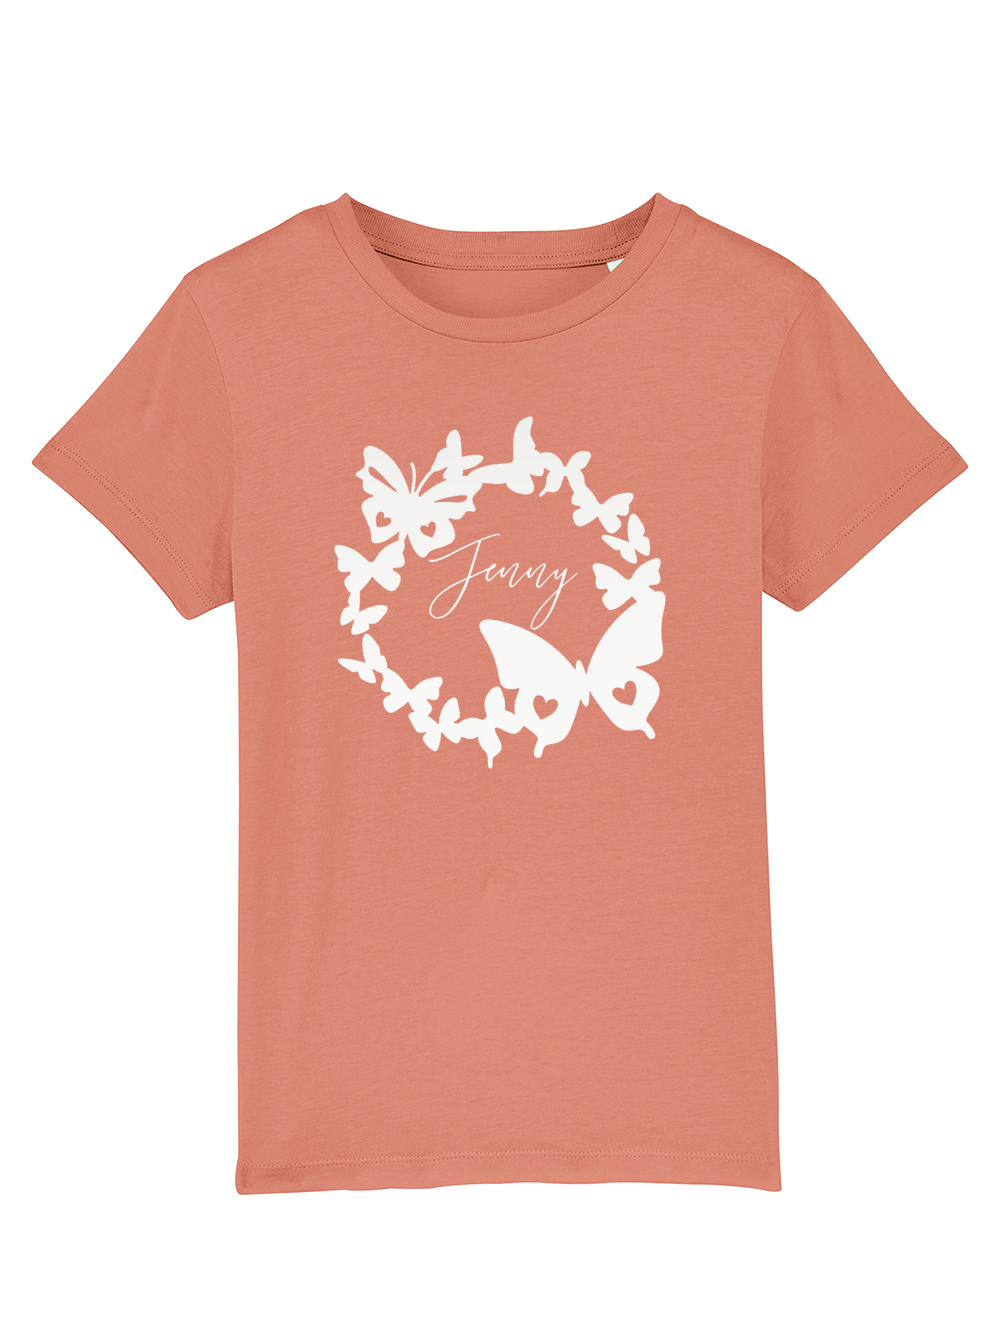 Butterfly Wreath Personalised Tshirt